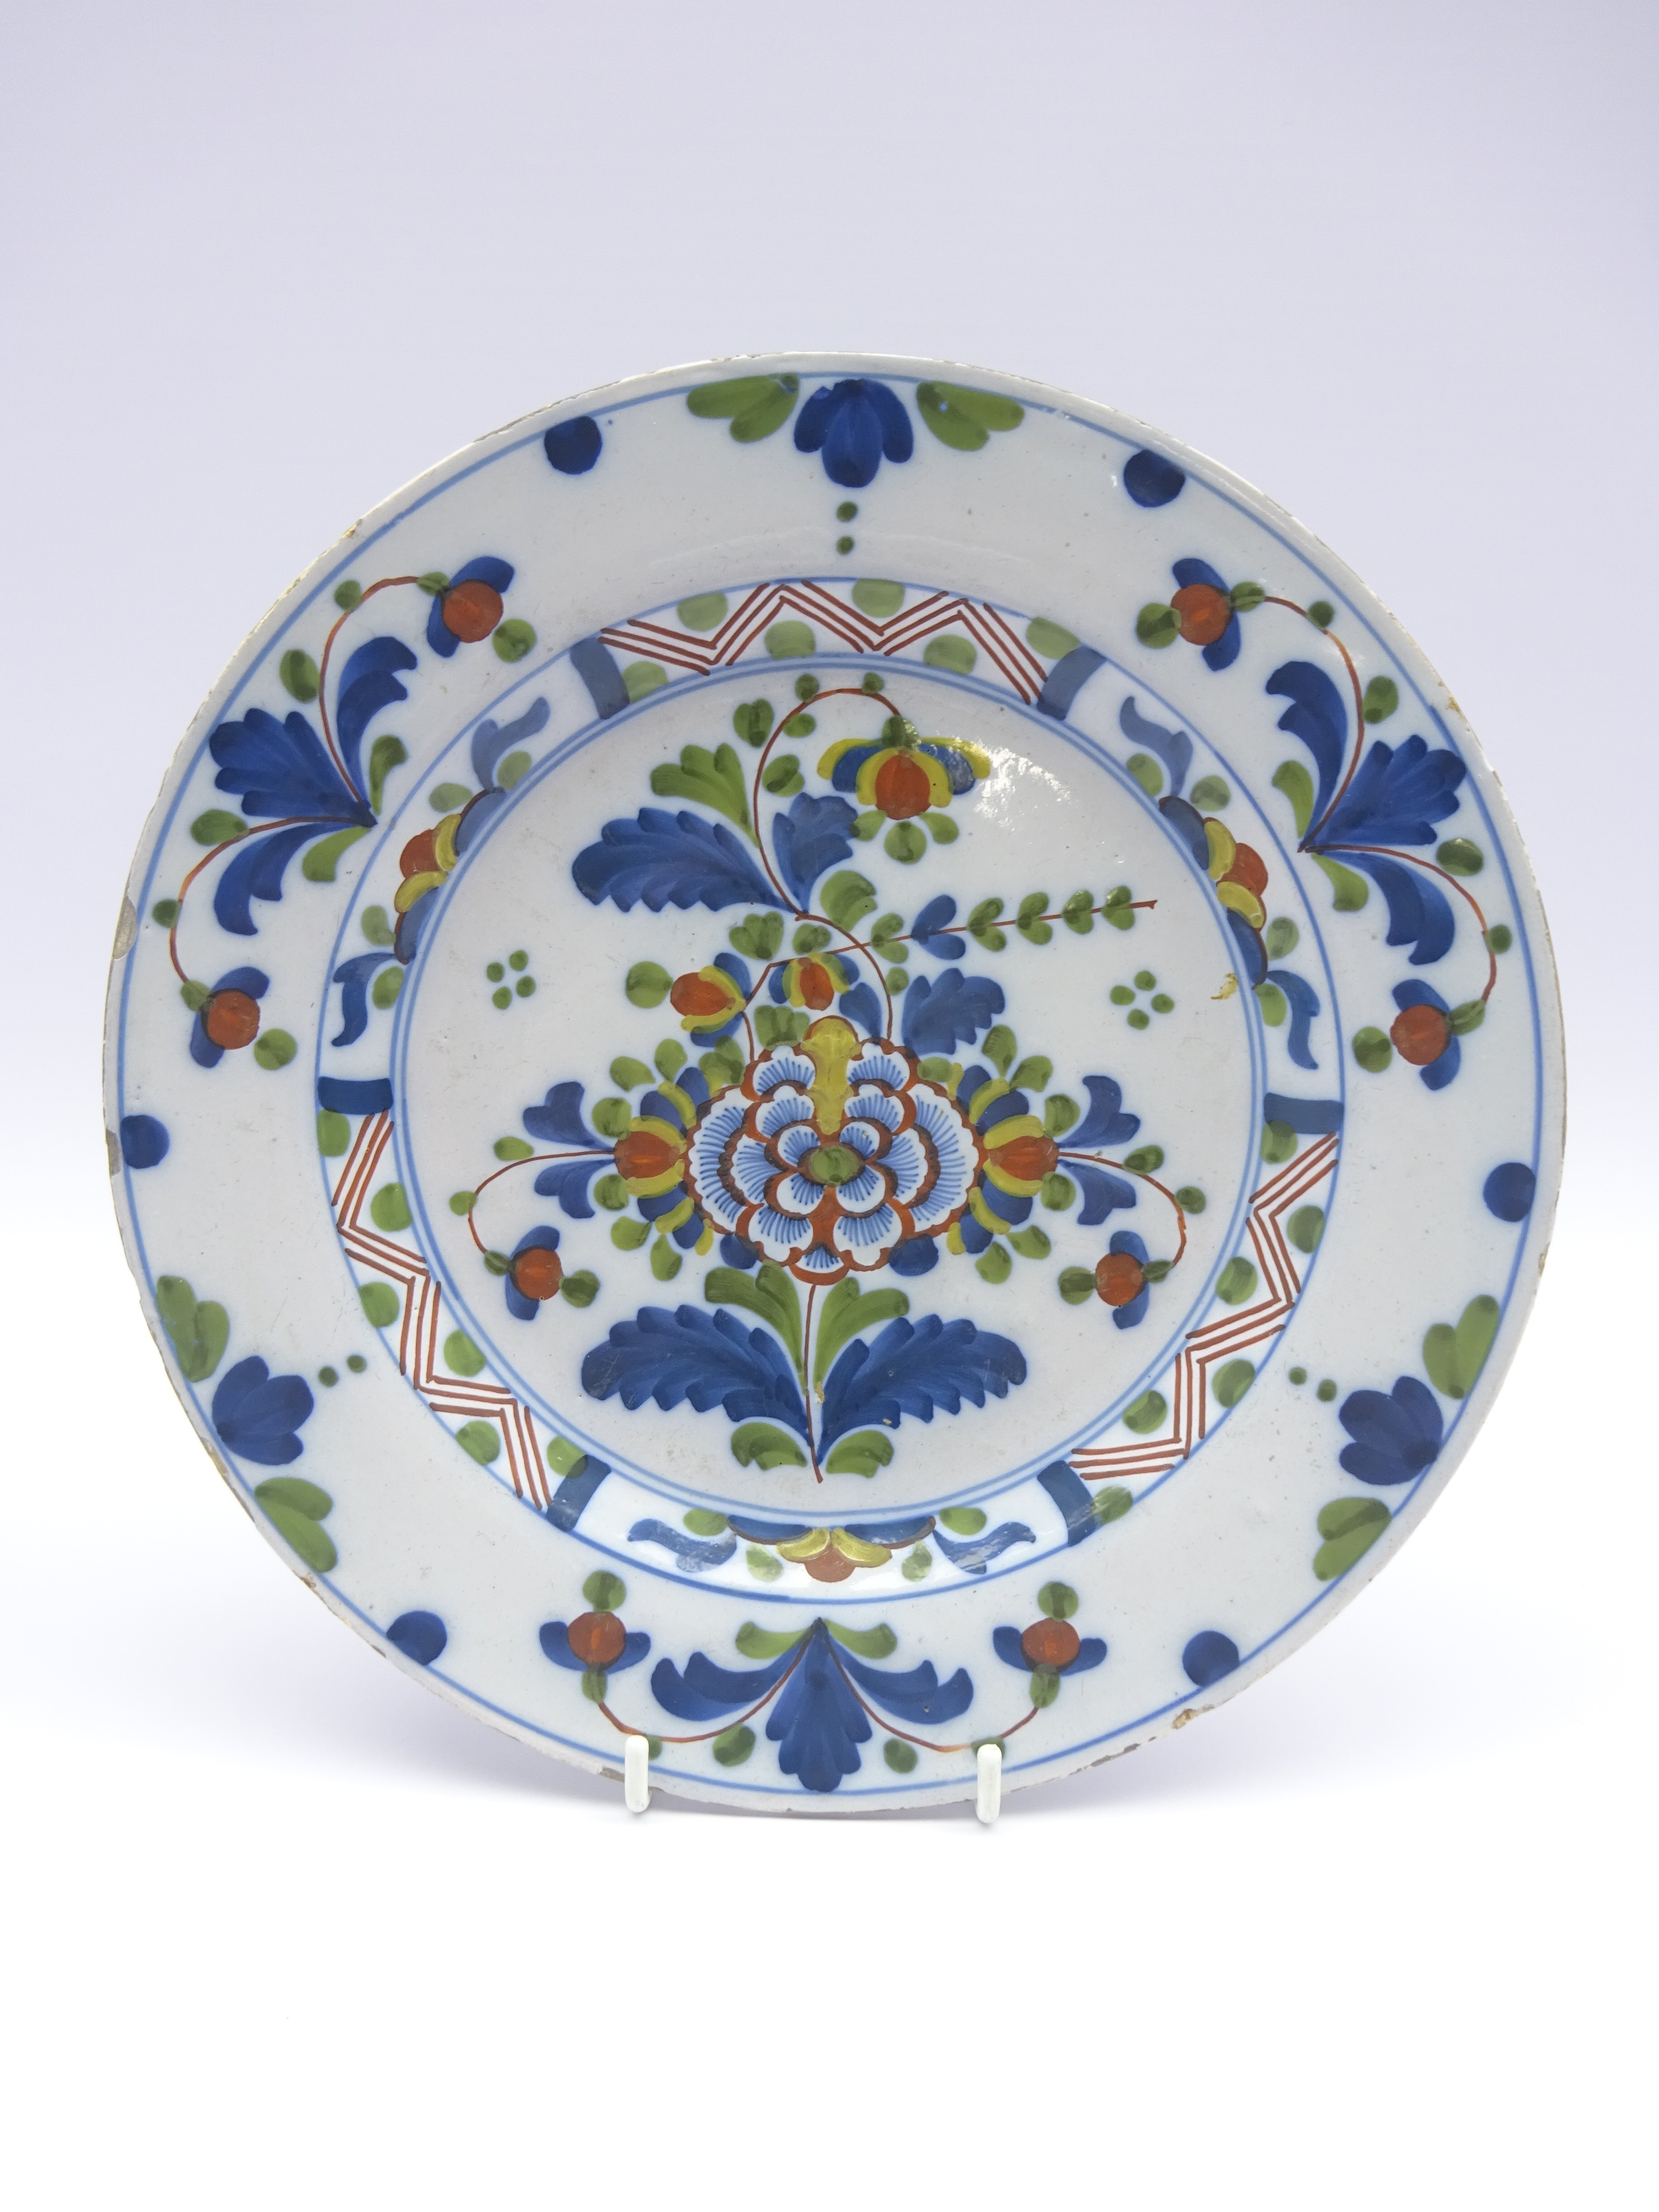 18th Century English Delft plate decorated with stylised flowers in blue, green and red,